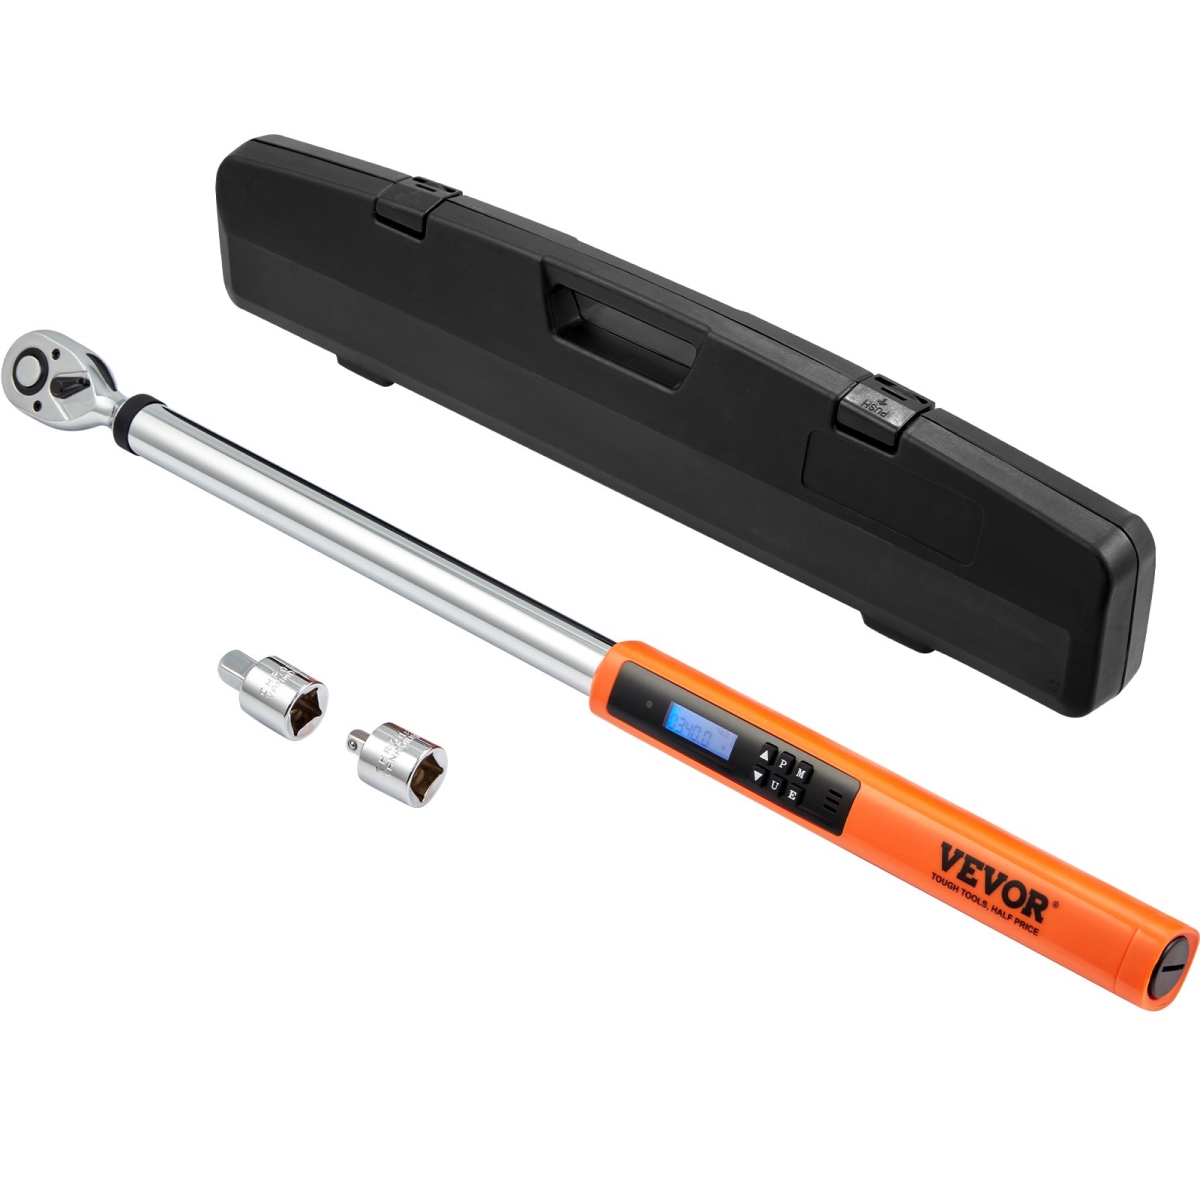 Picture of Vevor SXSNLBSSSZNSZ12X5V0 0.5 in. Drive Electronic Torque Wrench